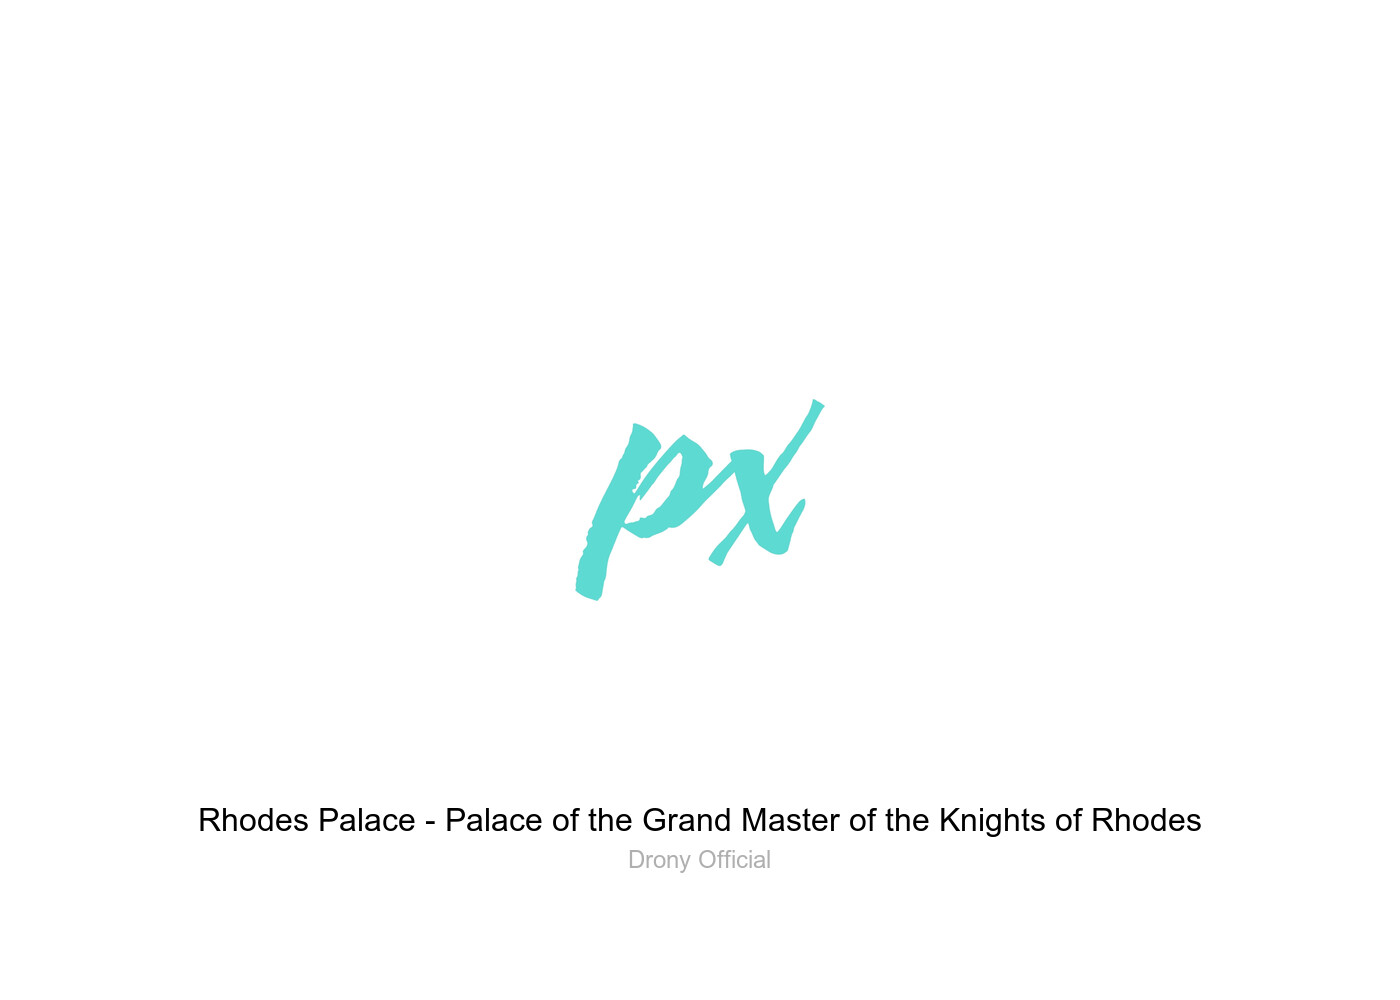 Rhodes Palace - Palace of the Grand Master of the Knights of Rhodes by  Drony Official